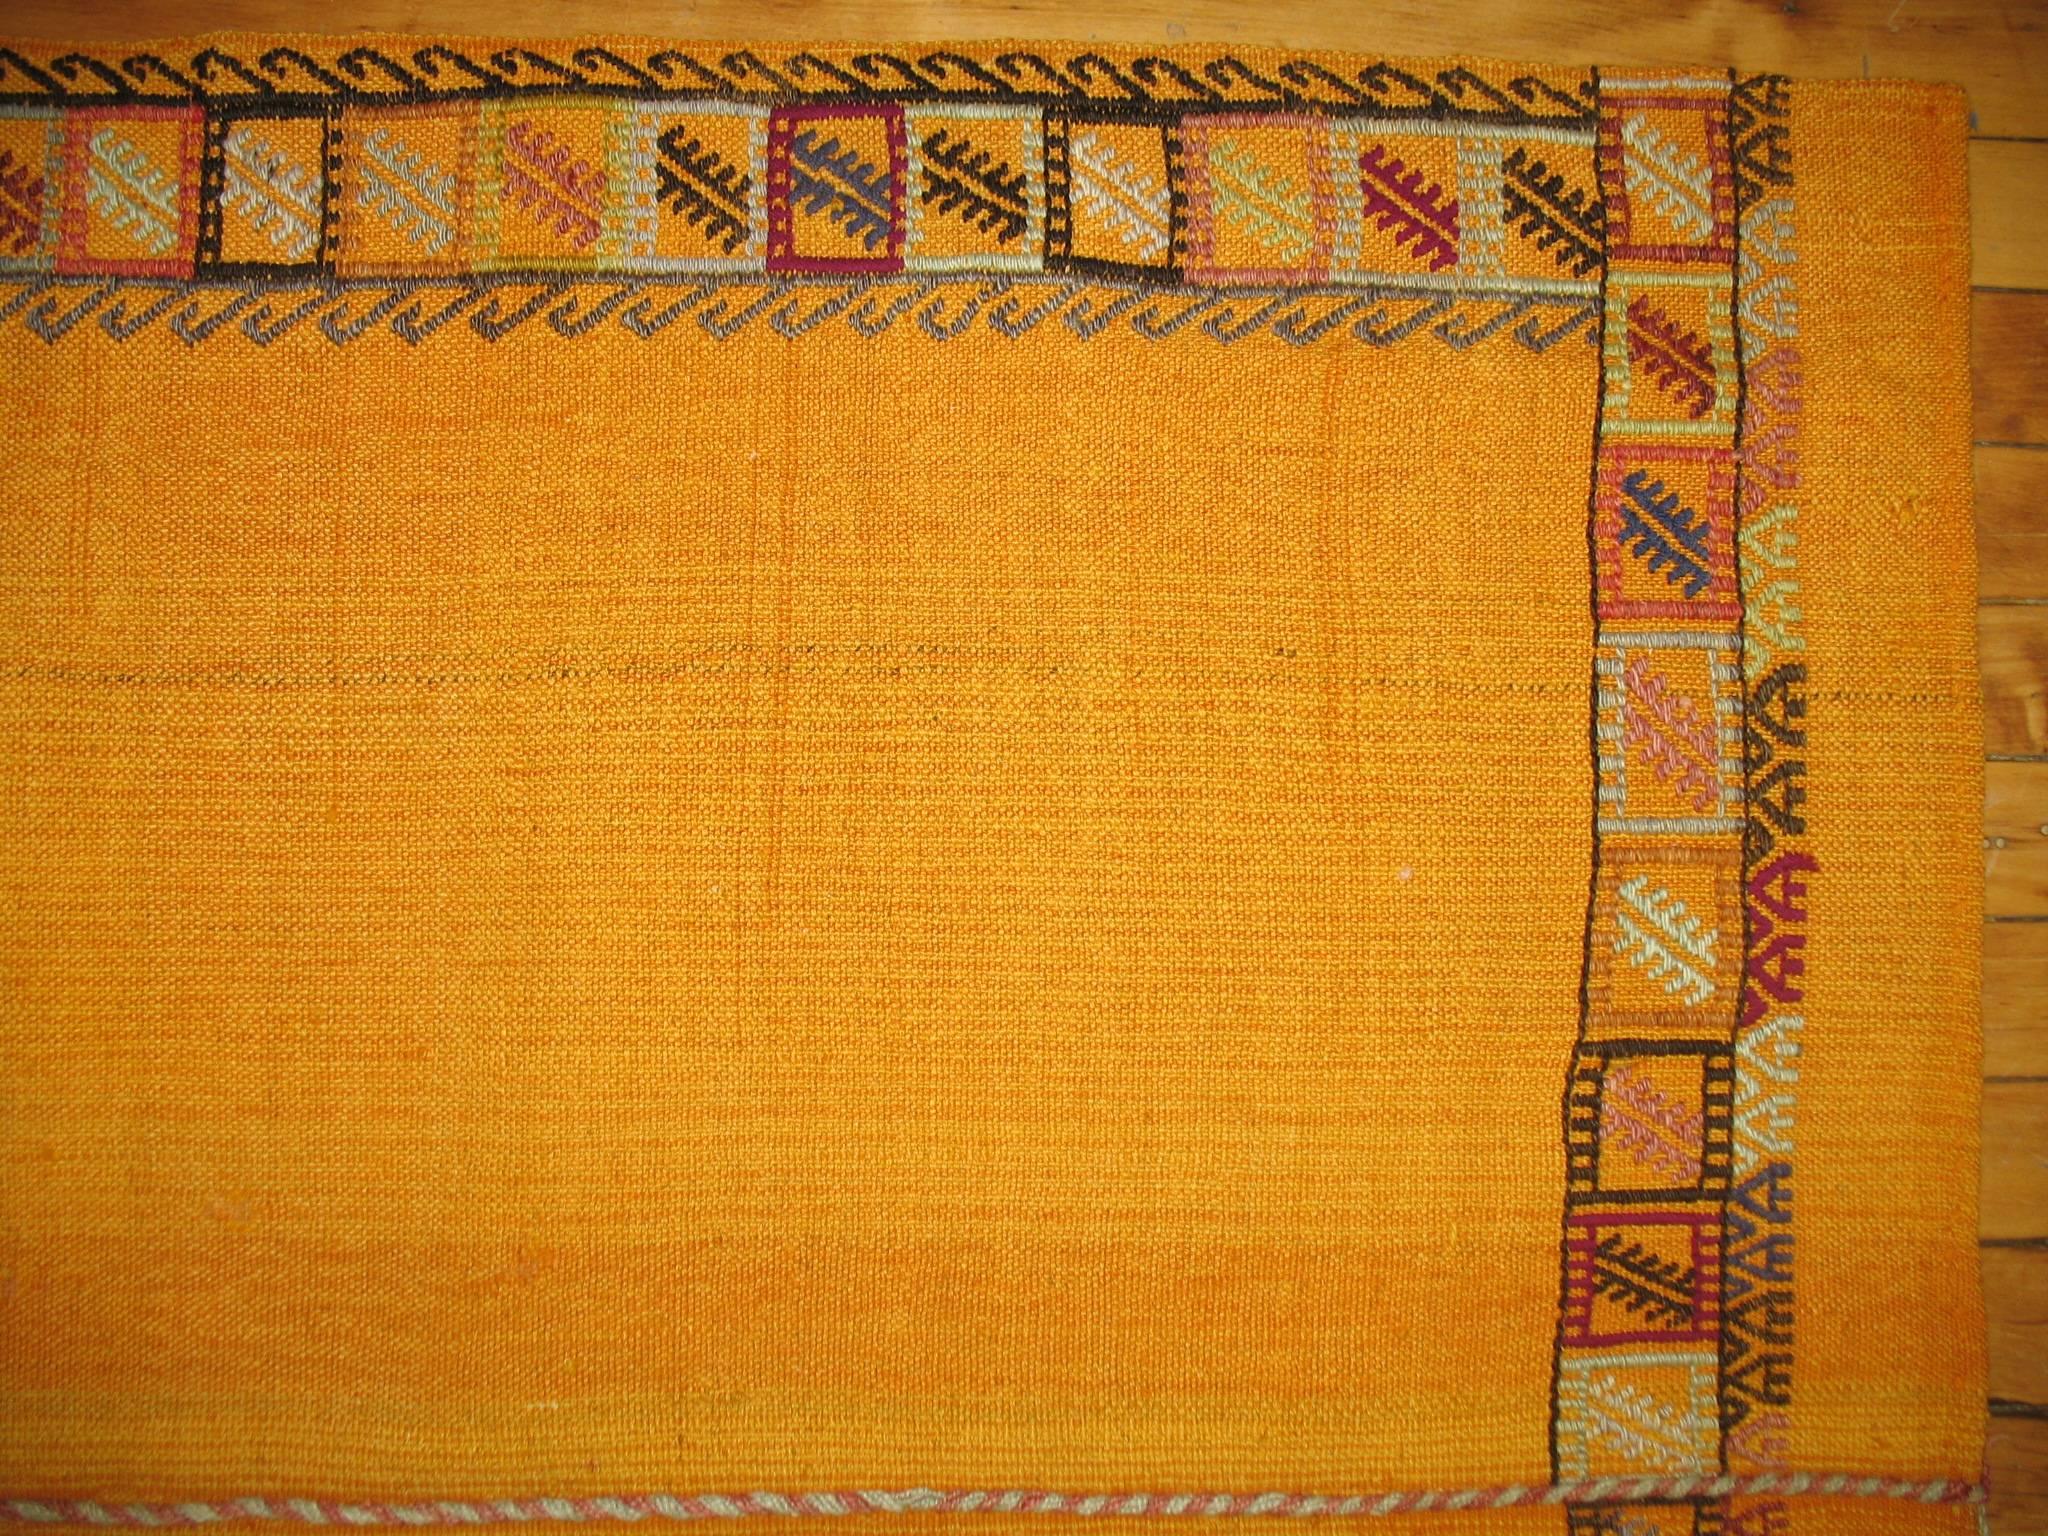 Throw square size flat-weave with a plain solid design in goldish yellow surrounded by a tribal border.